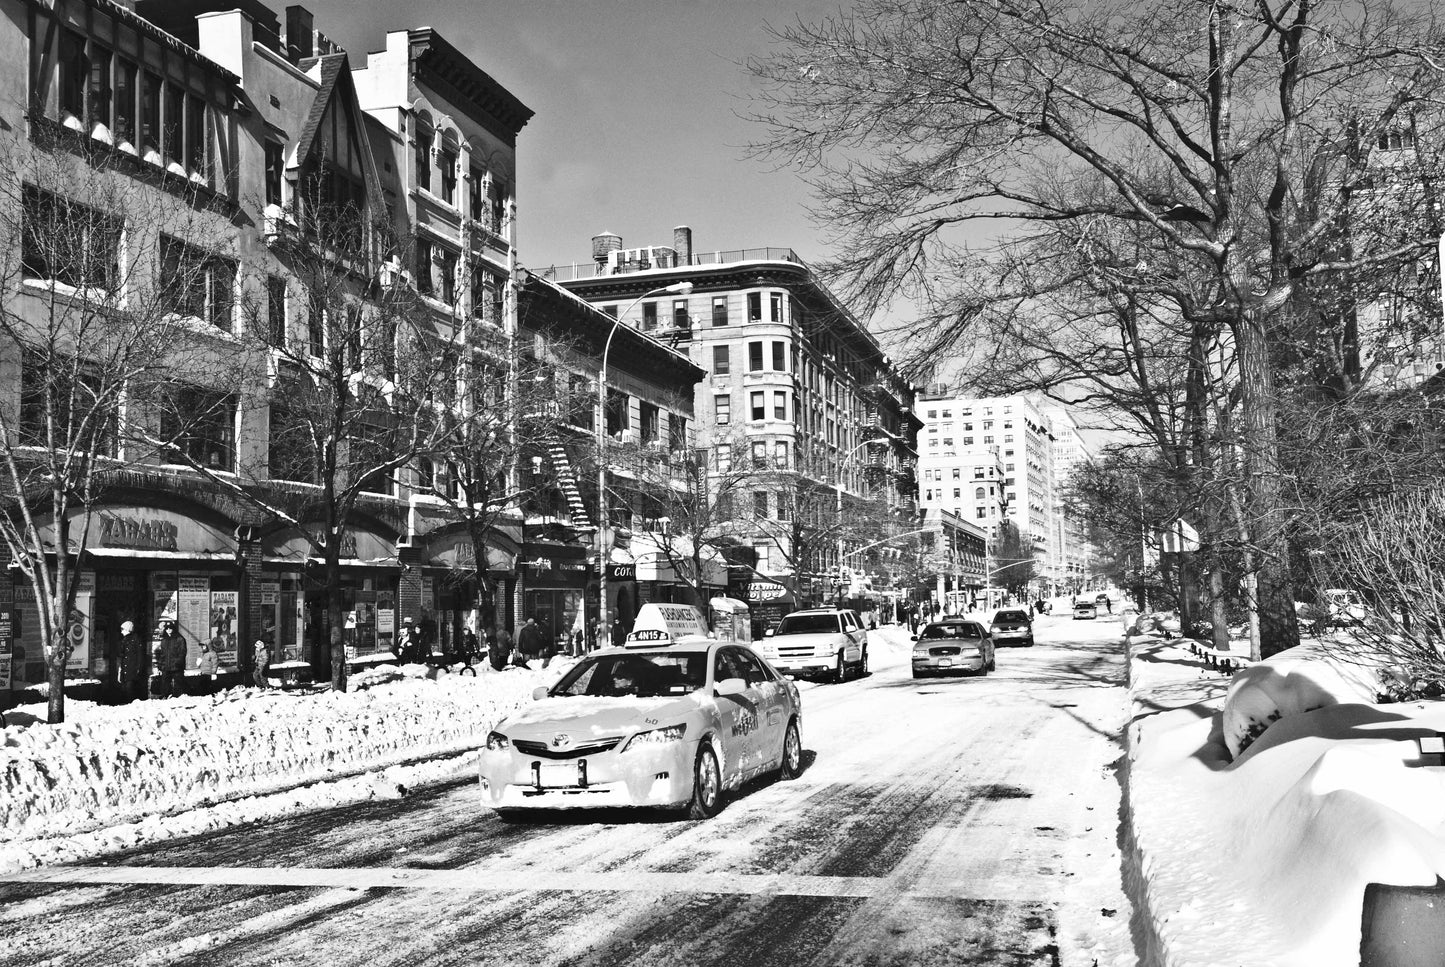 The winter sun shines on a snowy street scene from New Yorks Upper West Side